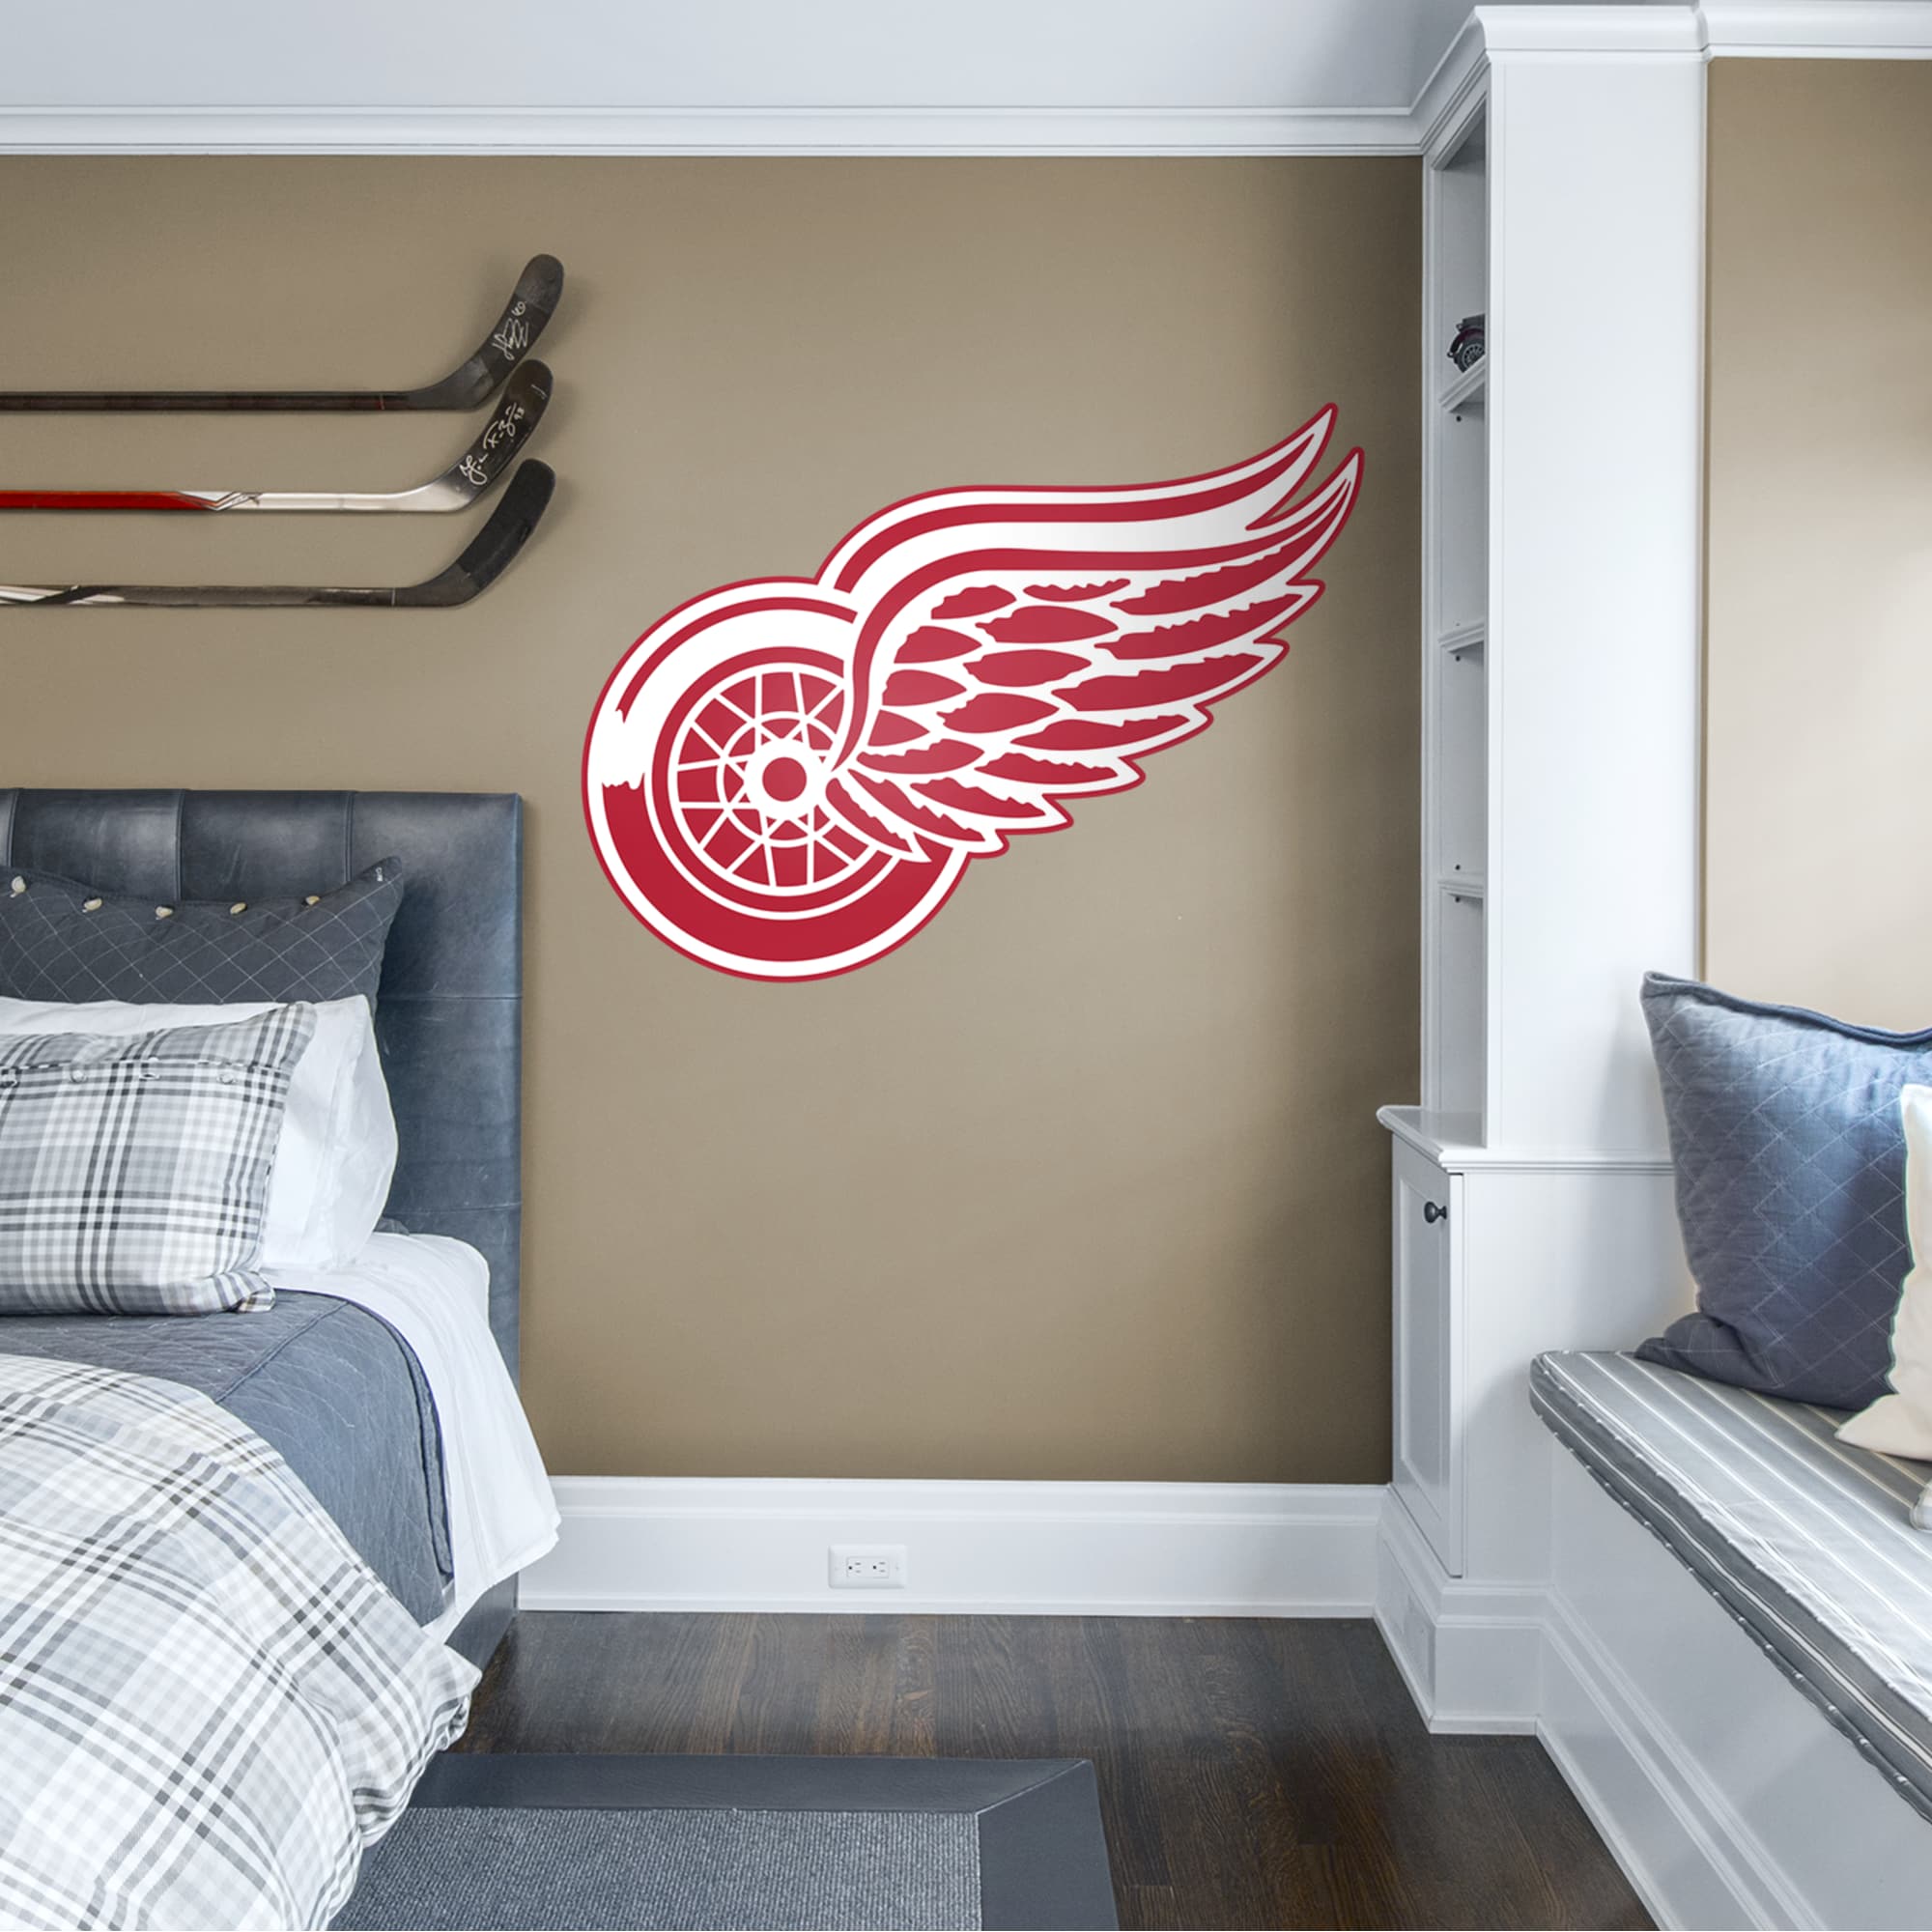 Detroit Red Wings: Logo - Officially Licensed NHL Removable Wall Decal Giant Logo (51"W x 38"H) by Fathead | Vinyl